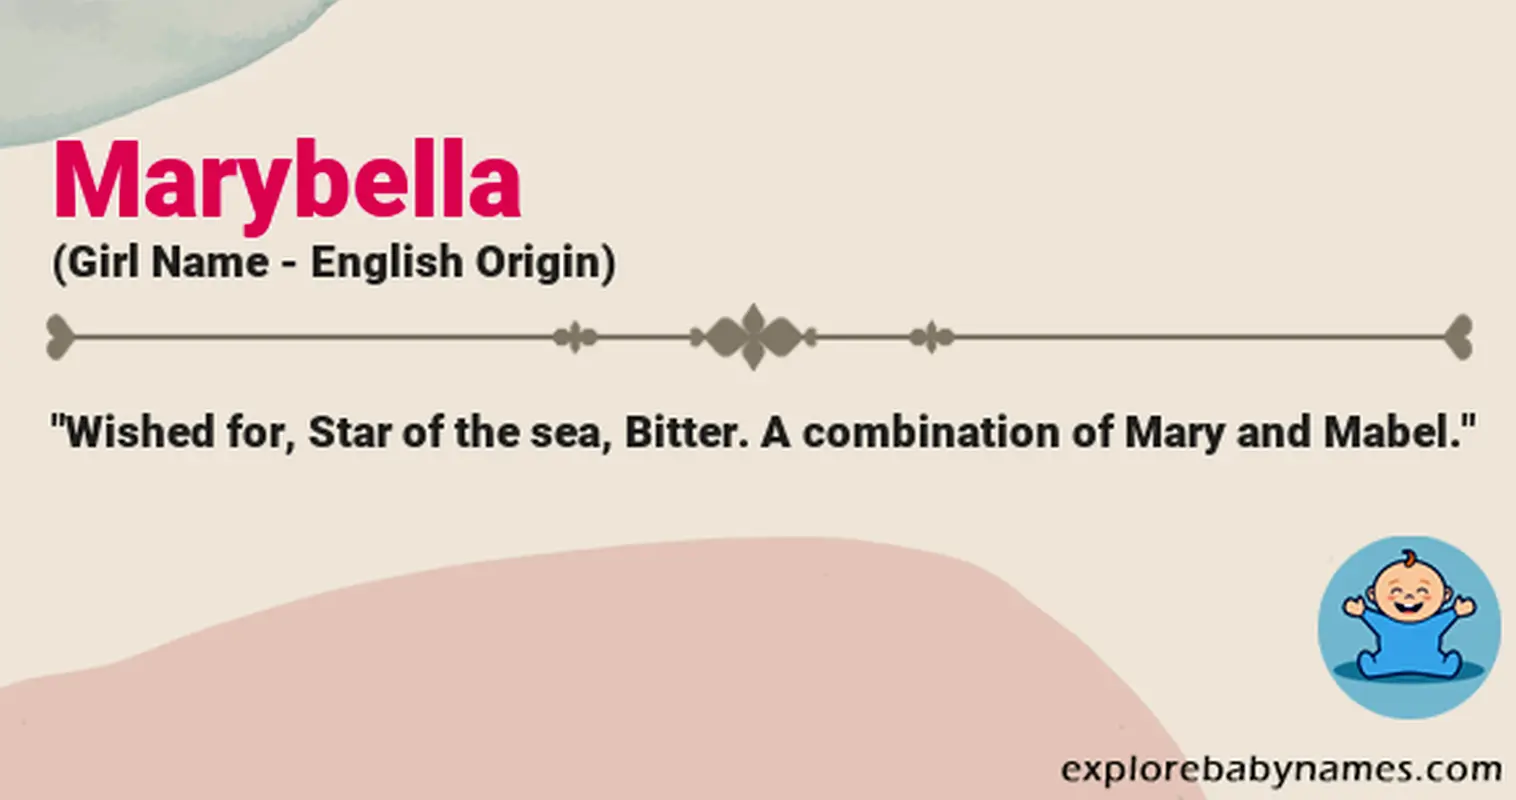 Meaning of Marybella